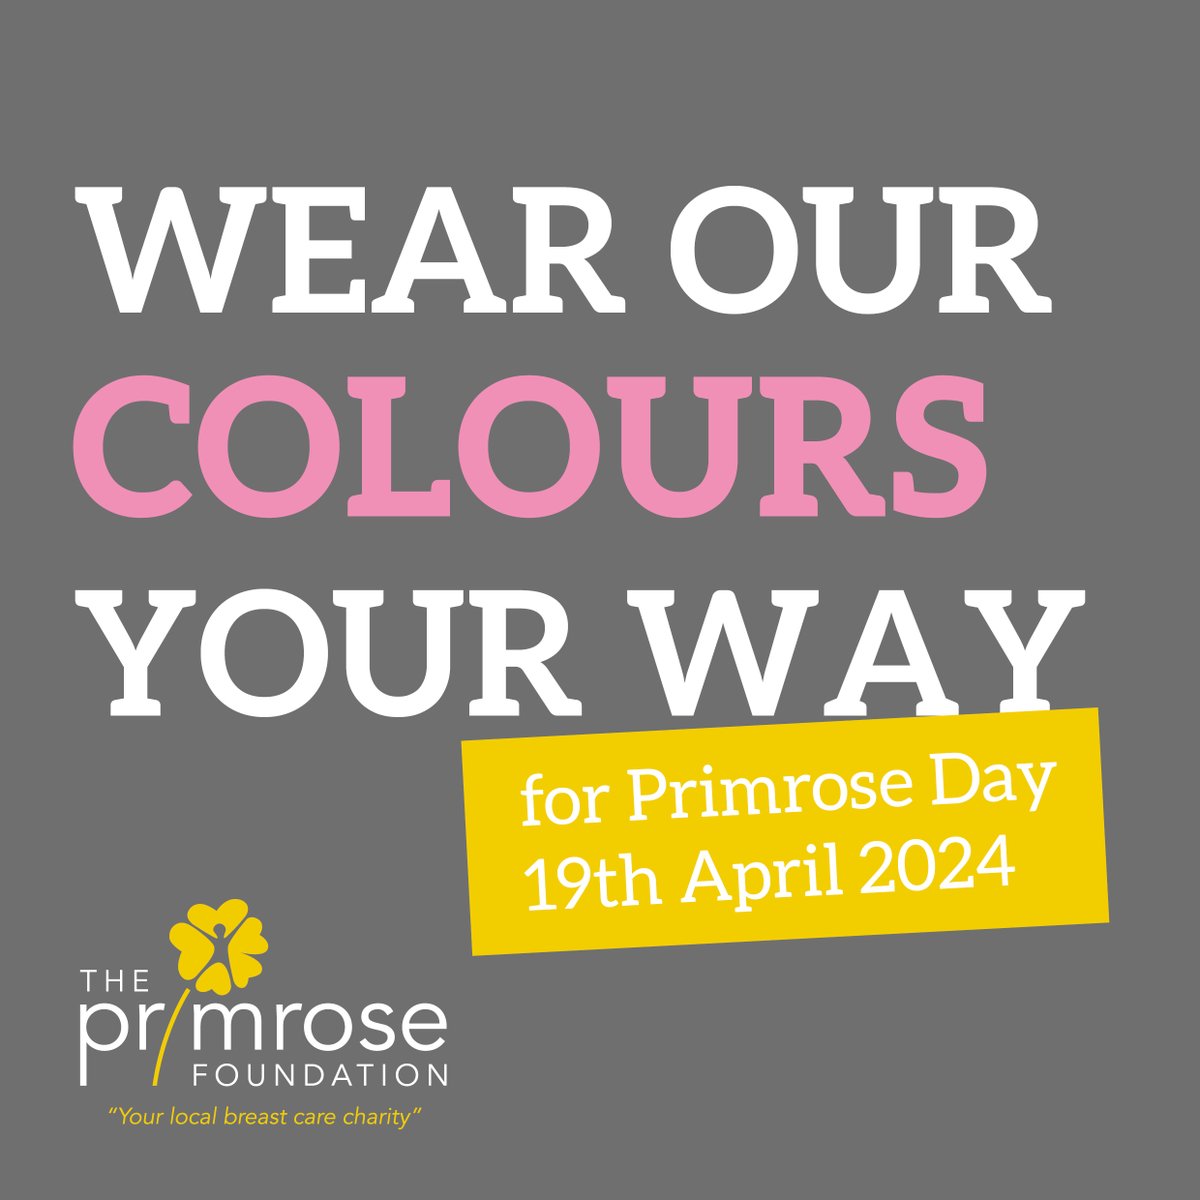 To celebrate our Anniversary we would like to invite everyone to get involved in our annual Primrose Day. primrosefoundation.org/support-and-ev… #charity #charityevent #happyanniversary #primroseday #getinvolved #breastcancer #breastcancerawareness #breastcancertreatment